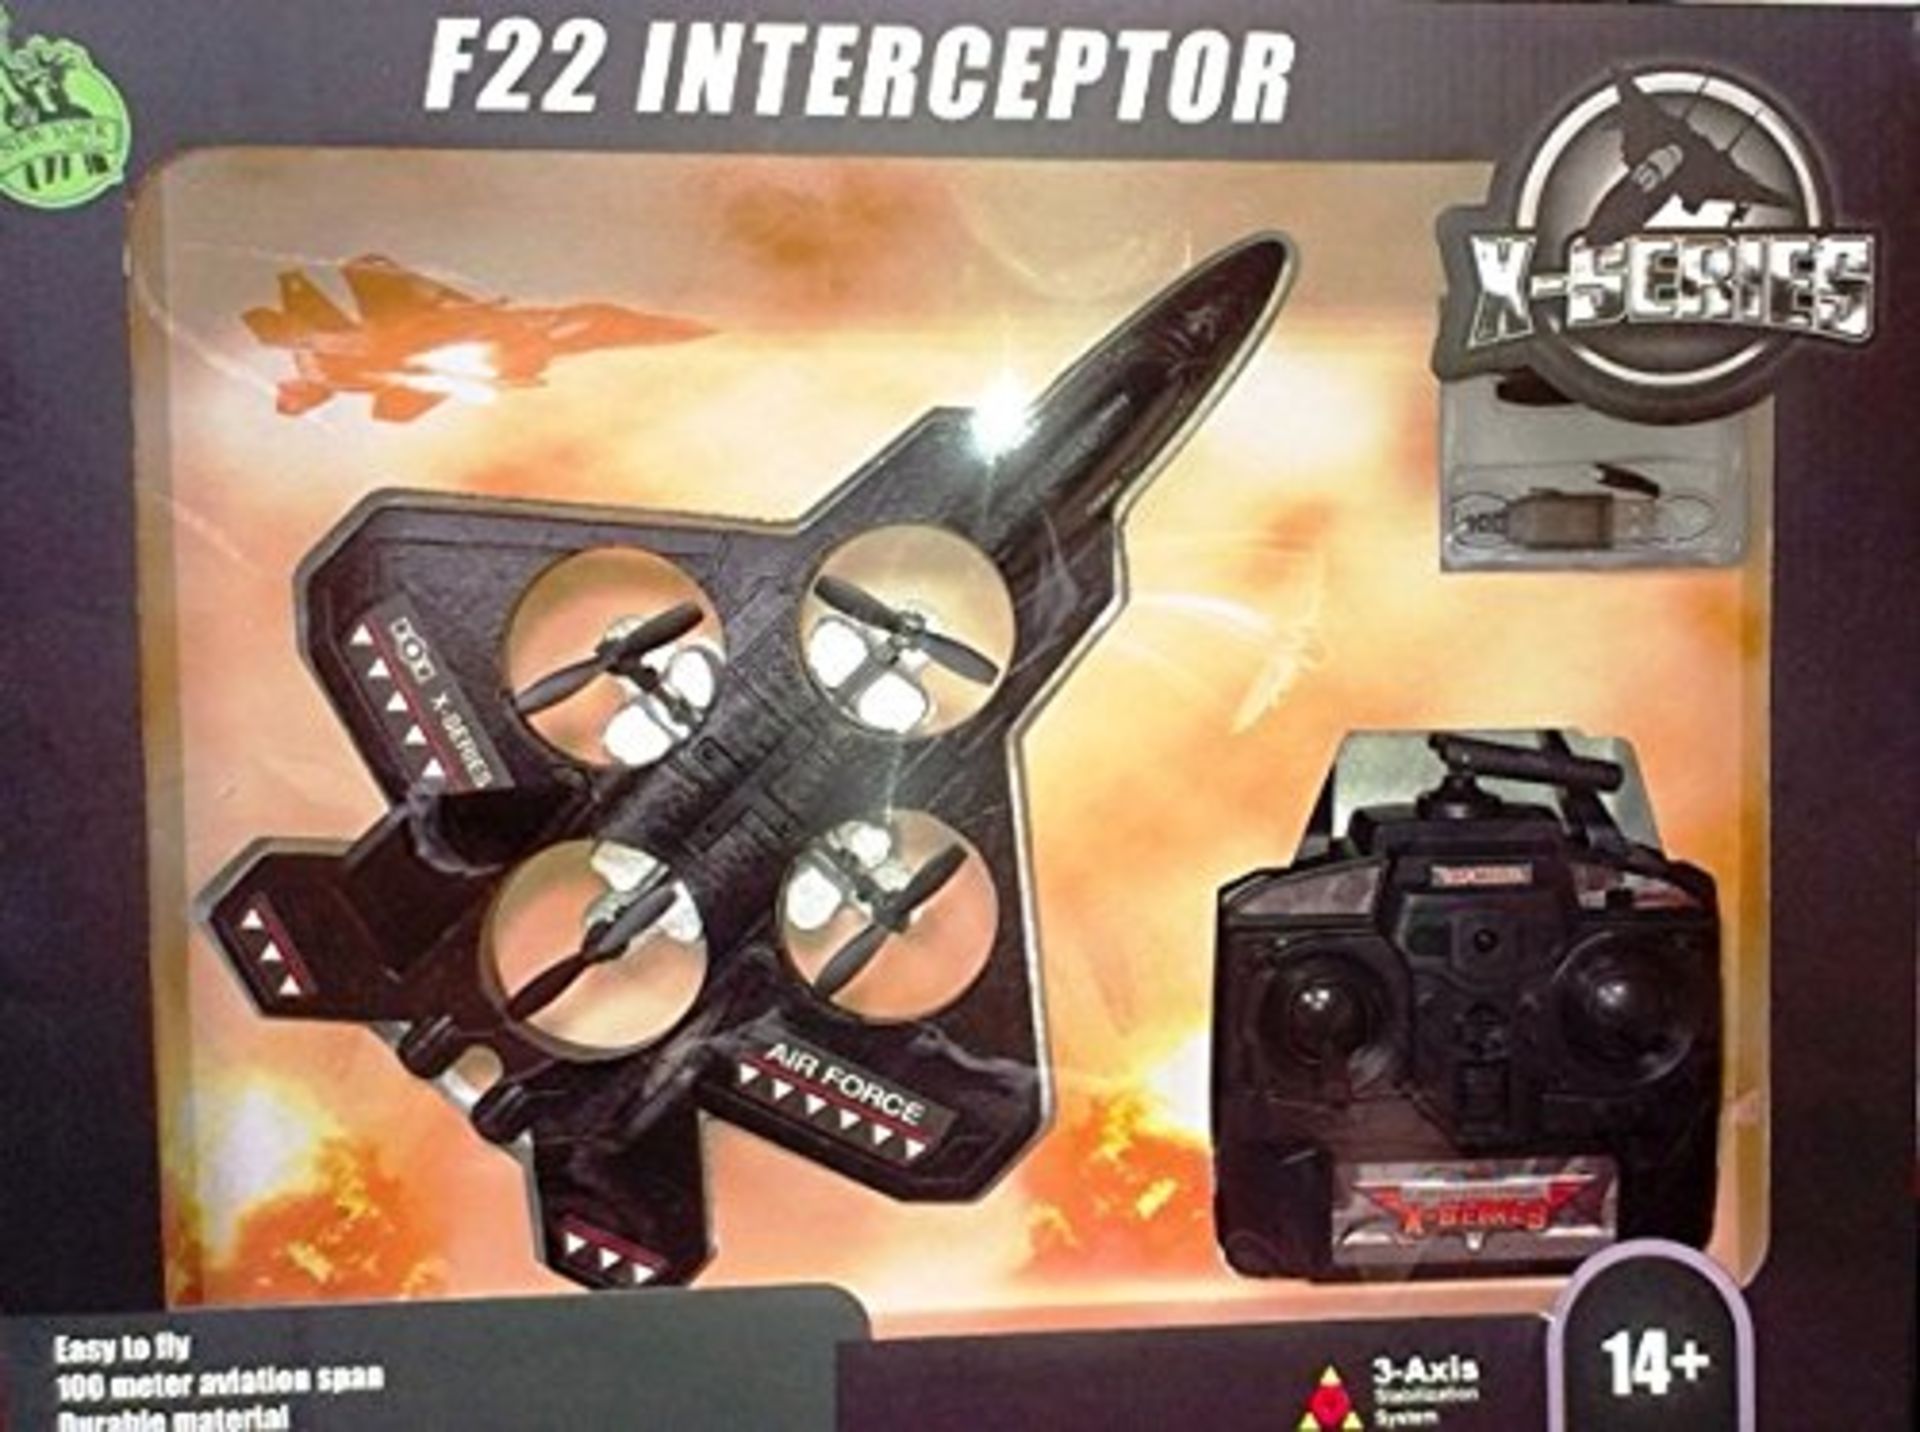 V Grade A X-series F22 Interceptor Radio Controlled Plane With 4 Channel 3 Axis Gyroscope - Image 2 of 2